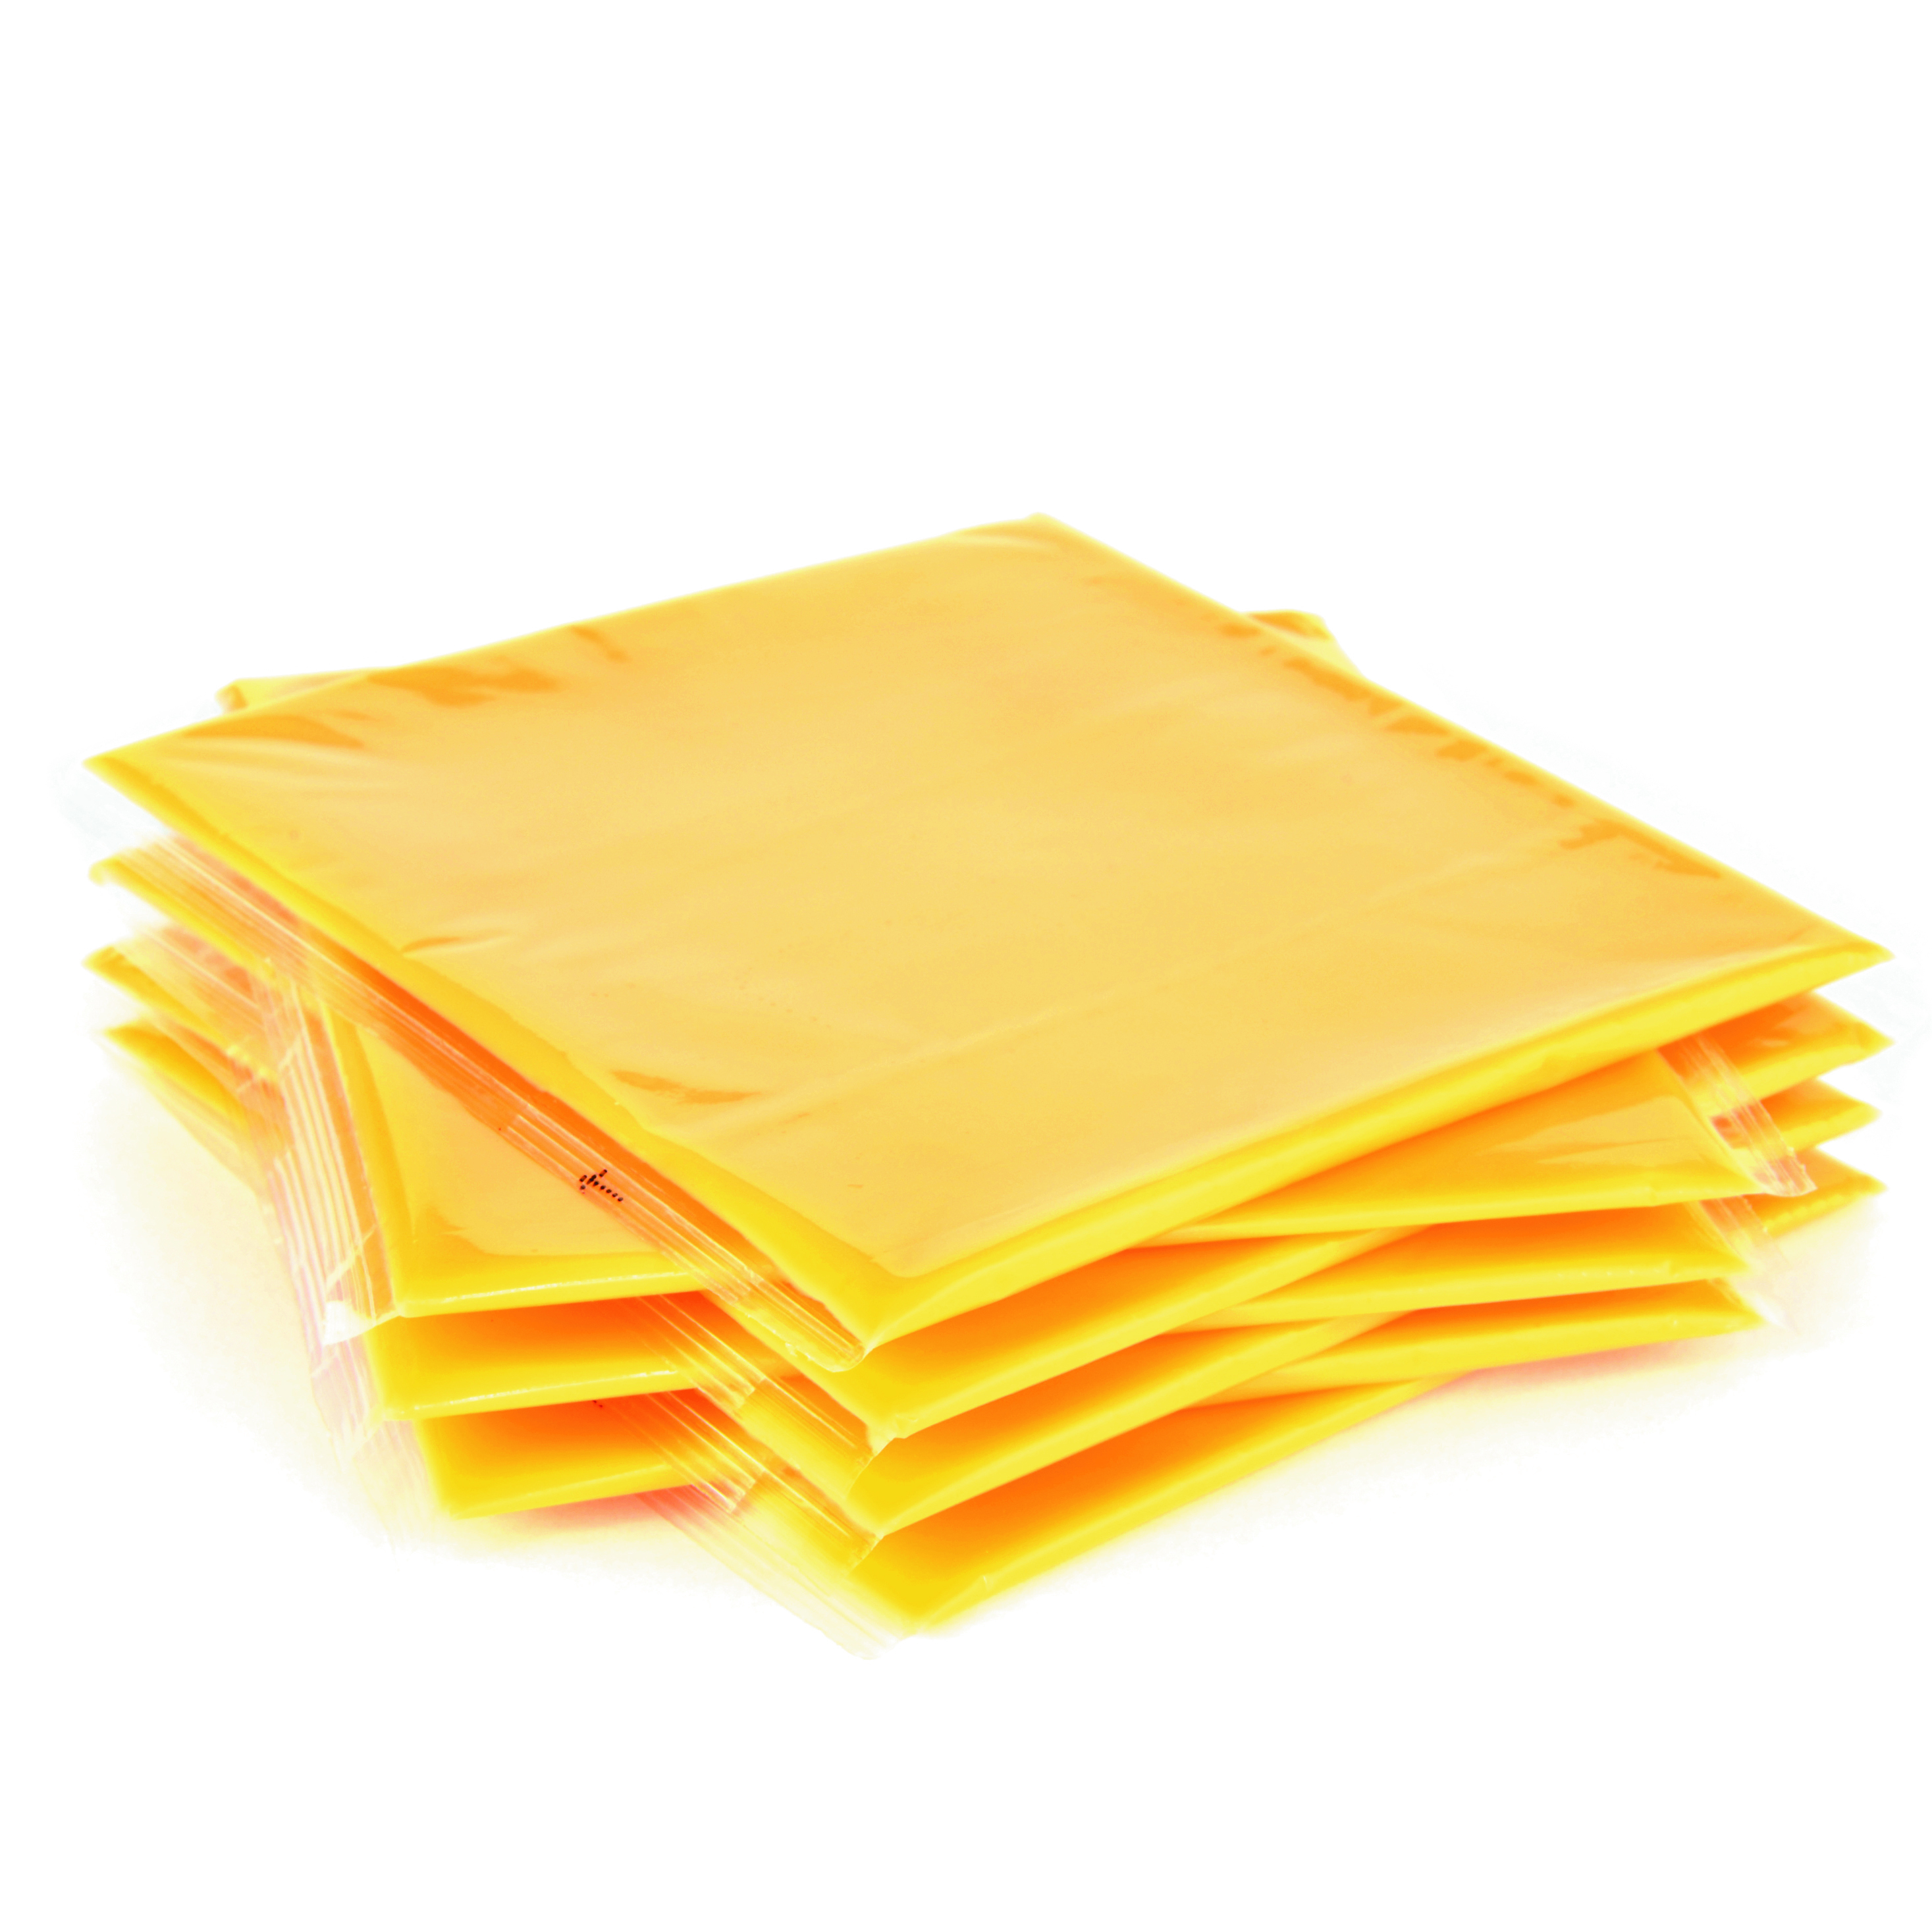 Free Cheese Slices Cliparts, Download Free Clip Art, Free.